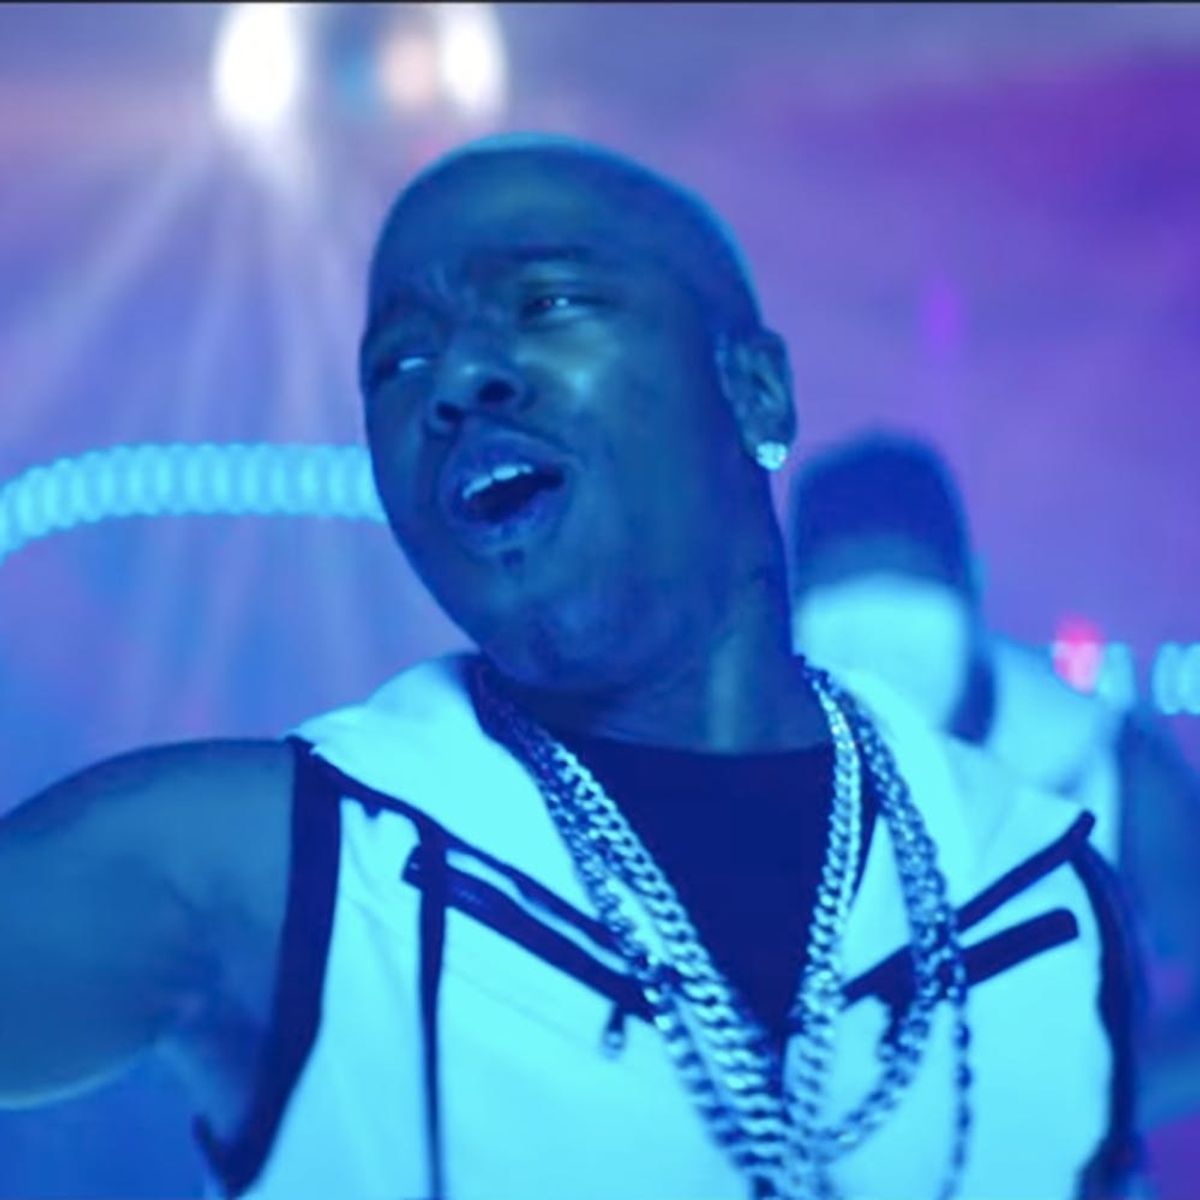 Sisqó’s 2017 Thong Song Is the Remake We Didn’t Know We Wanted